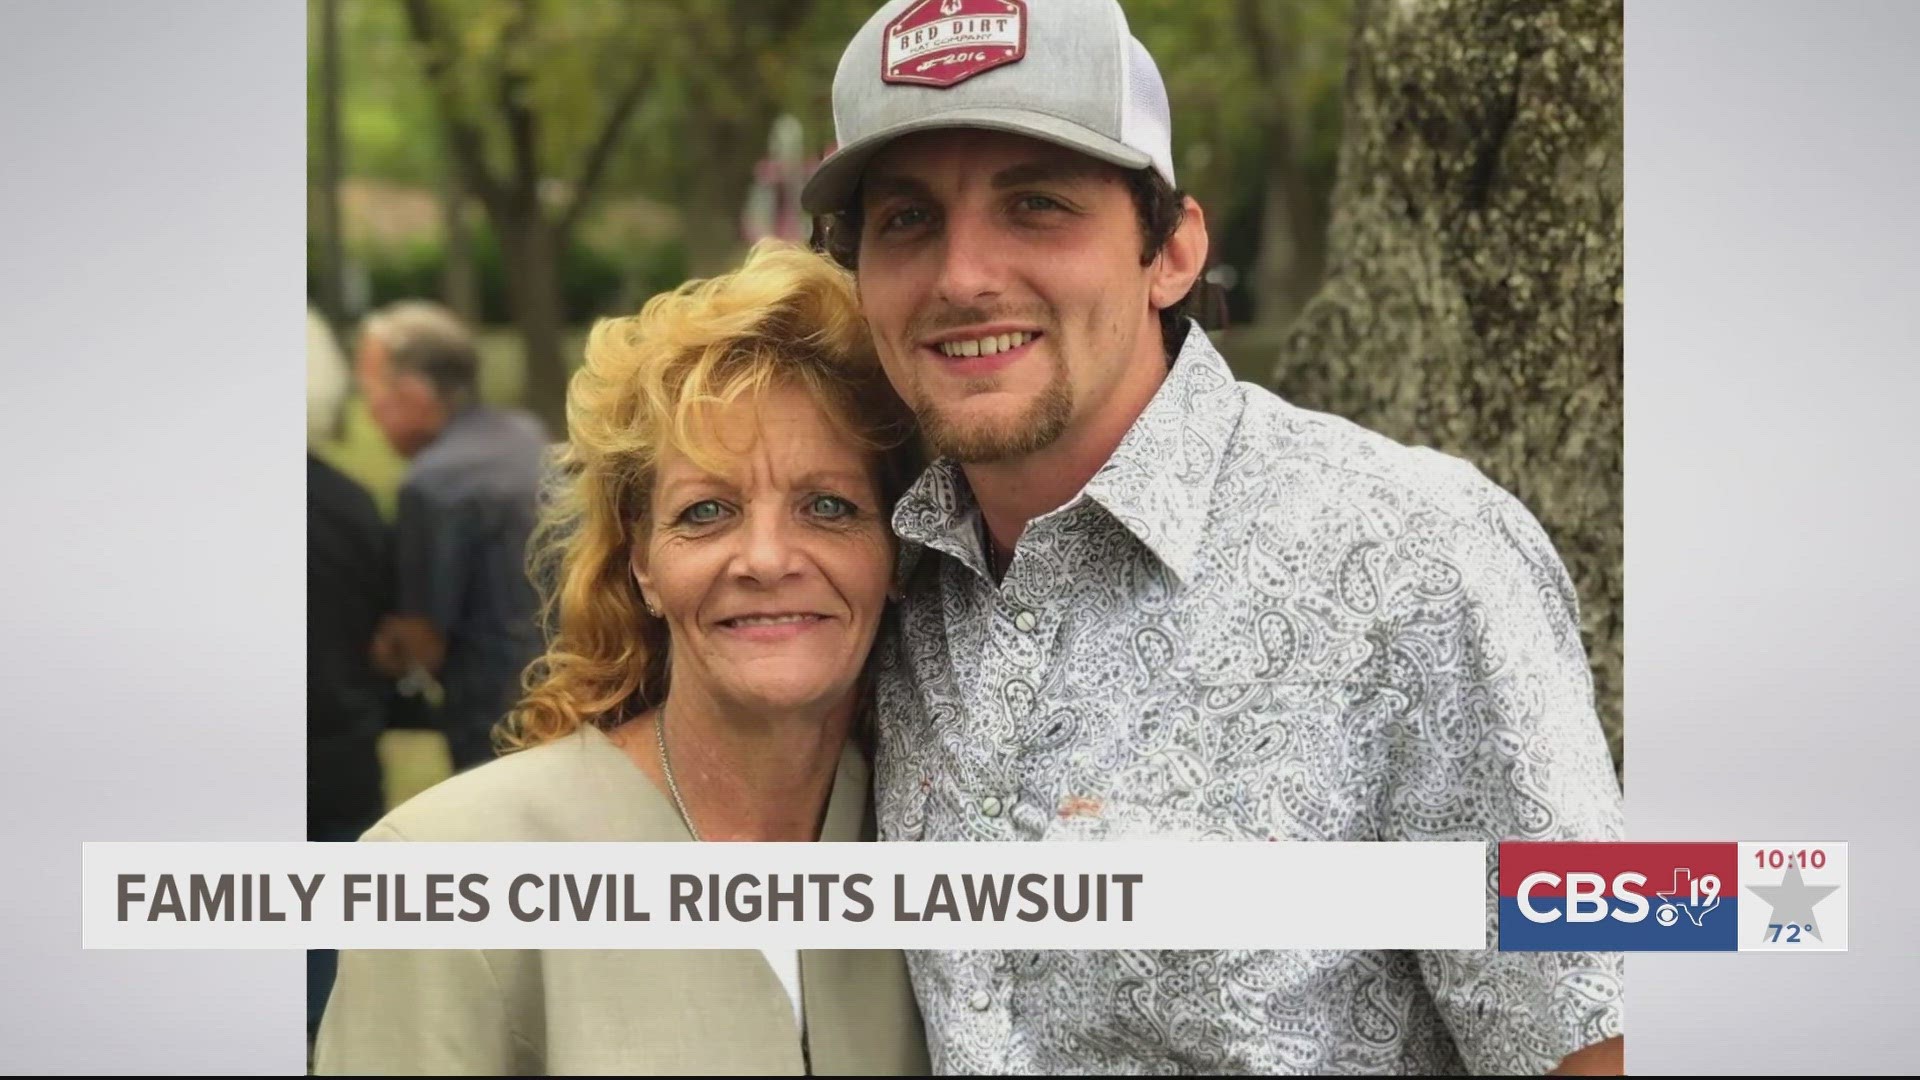 East Texas family files federal lawsuit against Rusk County in connection with fatal officer-involved shooting